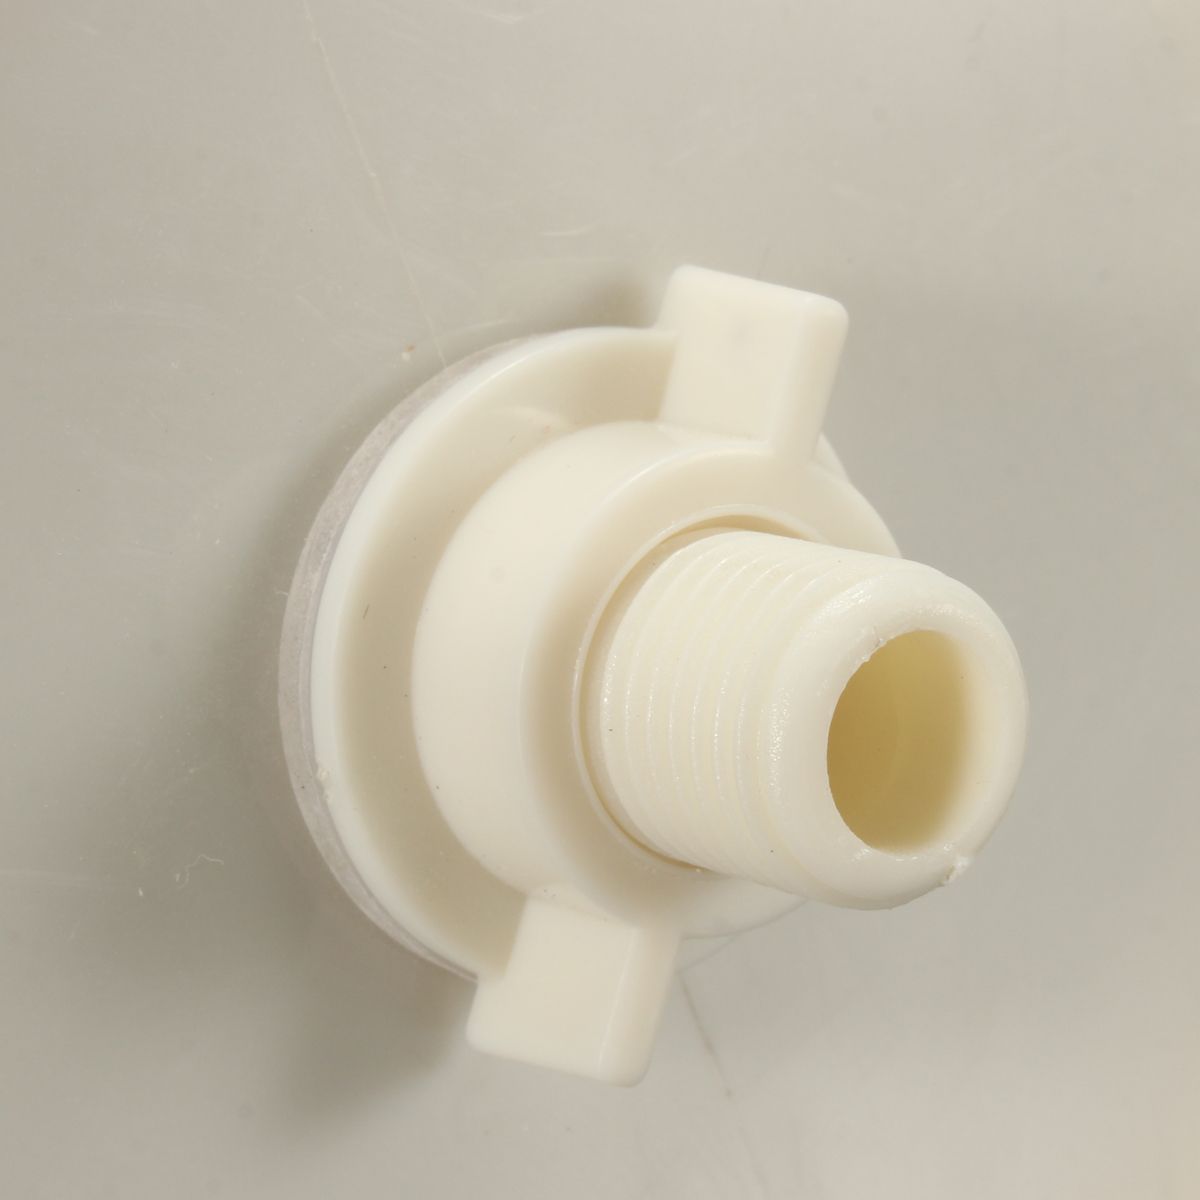 1PC-Ceramic-Dome-Water-Filter-System-Cartridge-Mineral-Purifier-Replacement-1553837